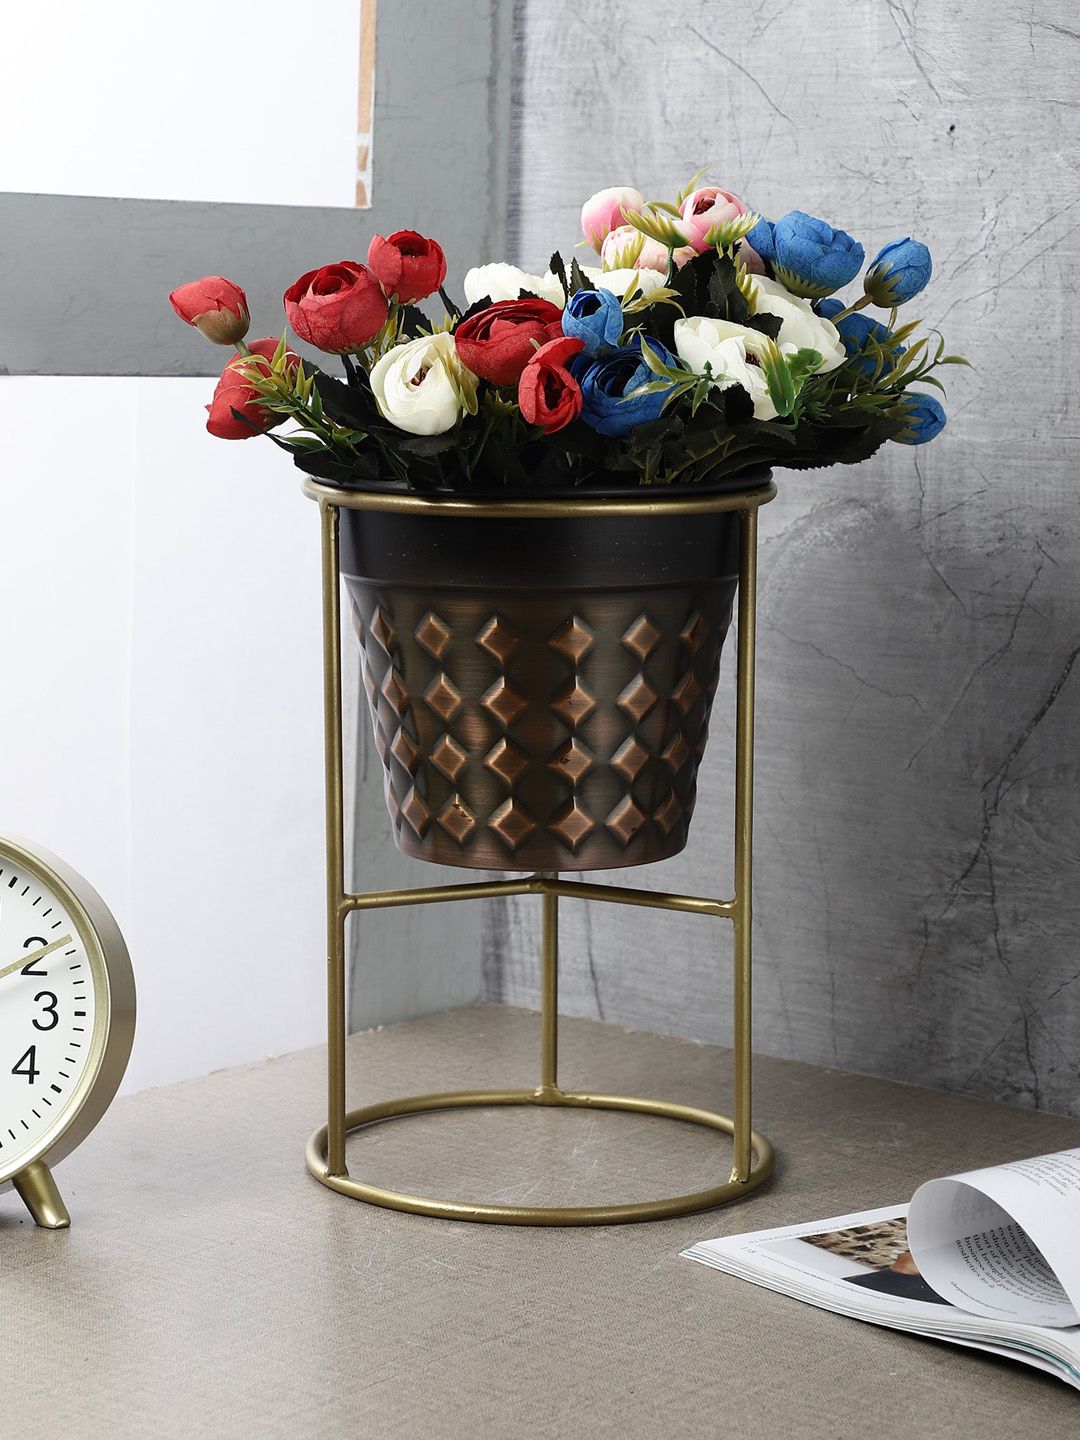 The Decor Mart Black & Copper Stunning Bowl Metal Planter With Stand Price in India